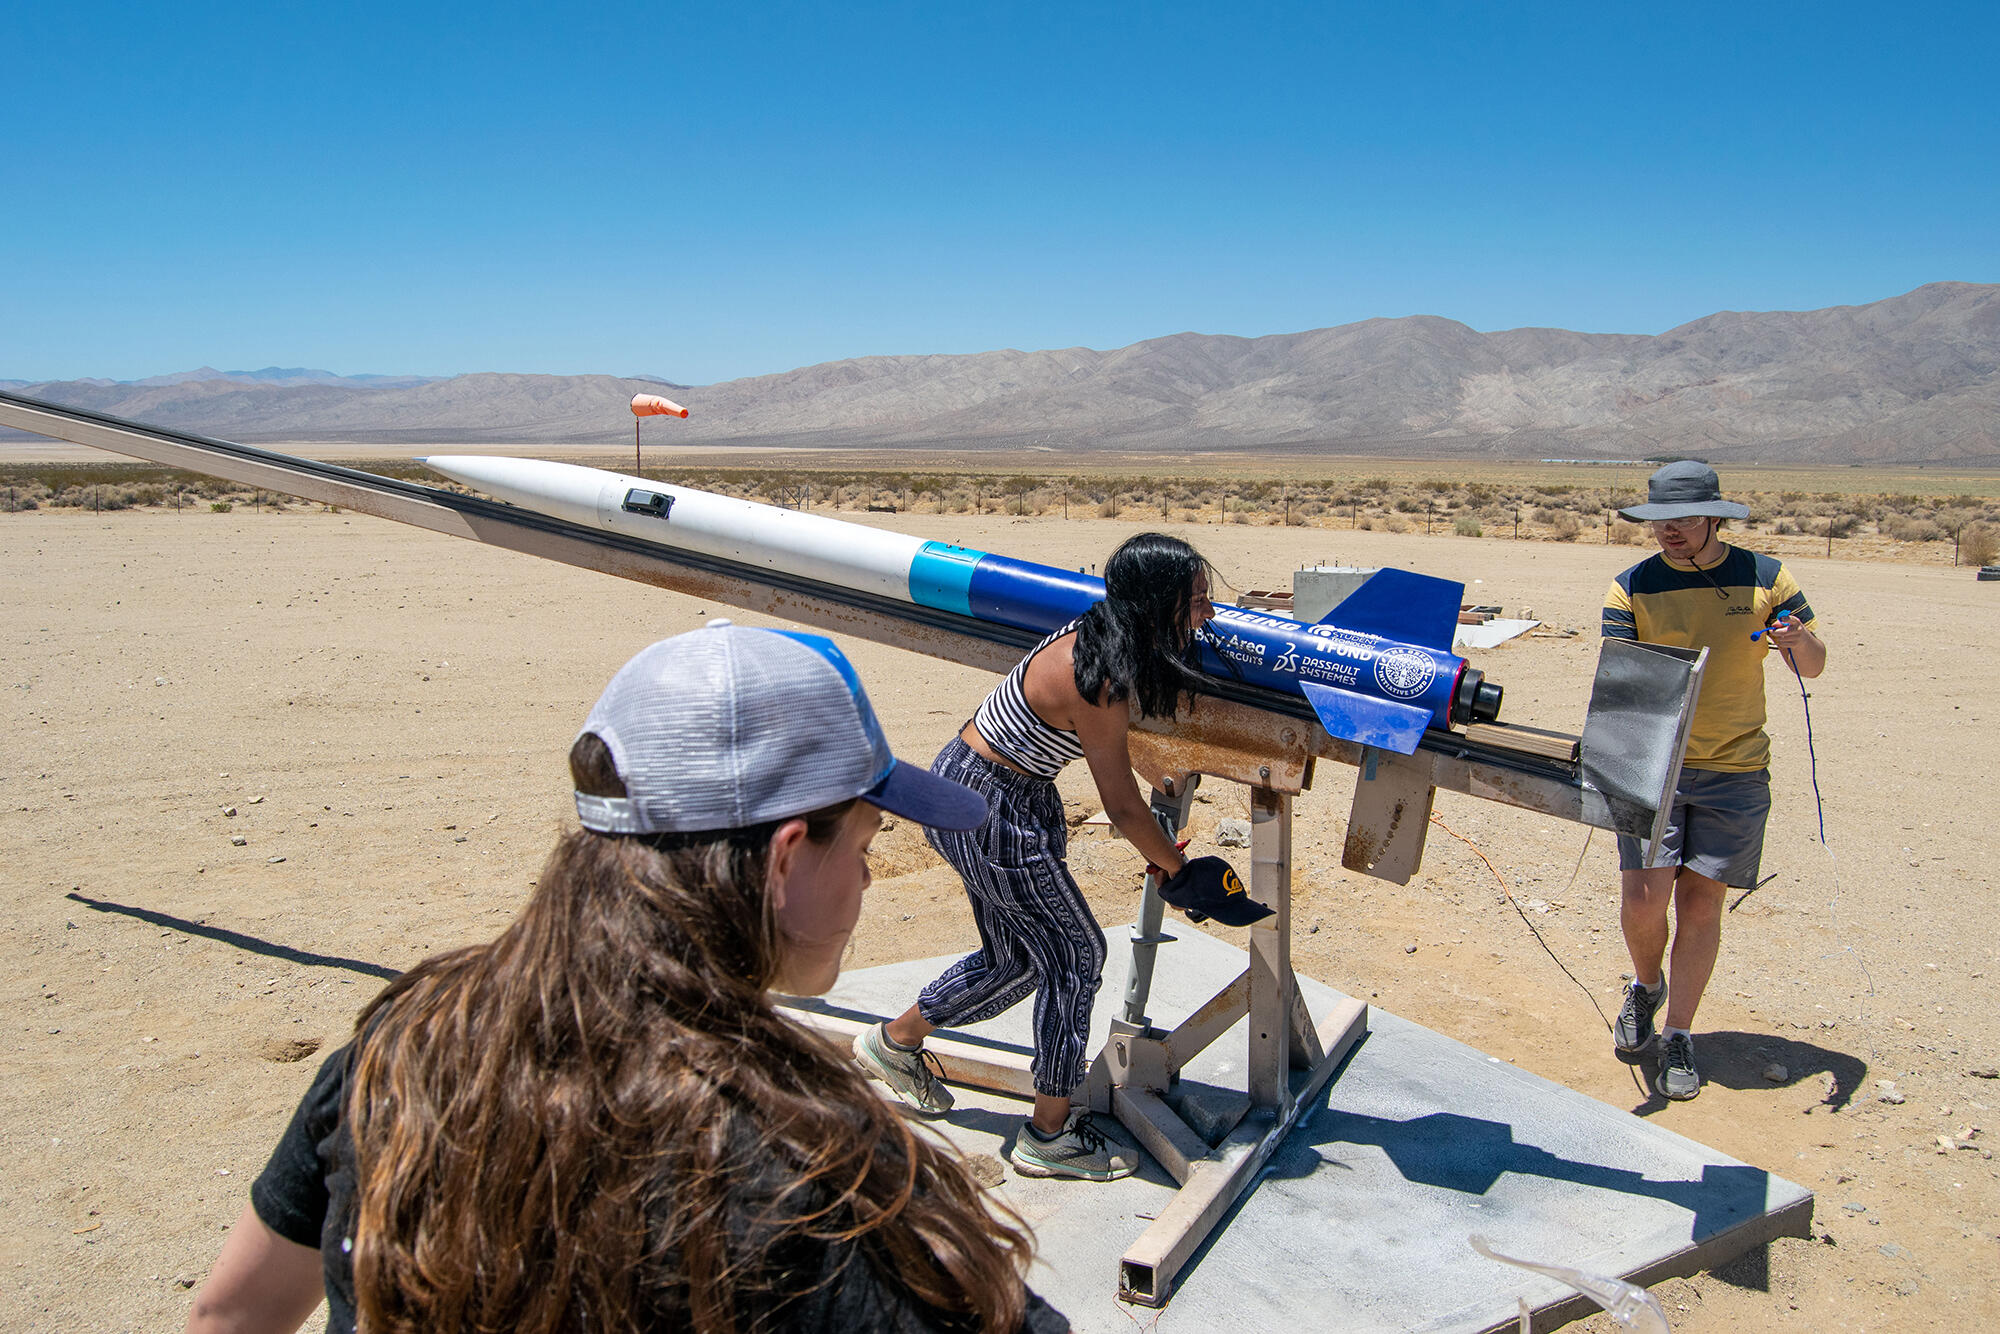 Space Technologies and Rocketry (STAR), a student club at UC Berkeley, launches its Bear Force One rocket in Mojave, Calif., on Saturday, June 5, 2021. Clubs such as STAR highlight the great interest in aerospace research among UC Berkeley undergraduates.